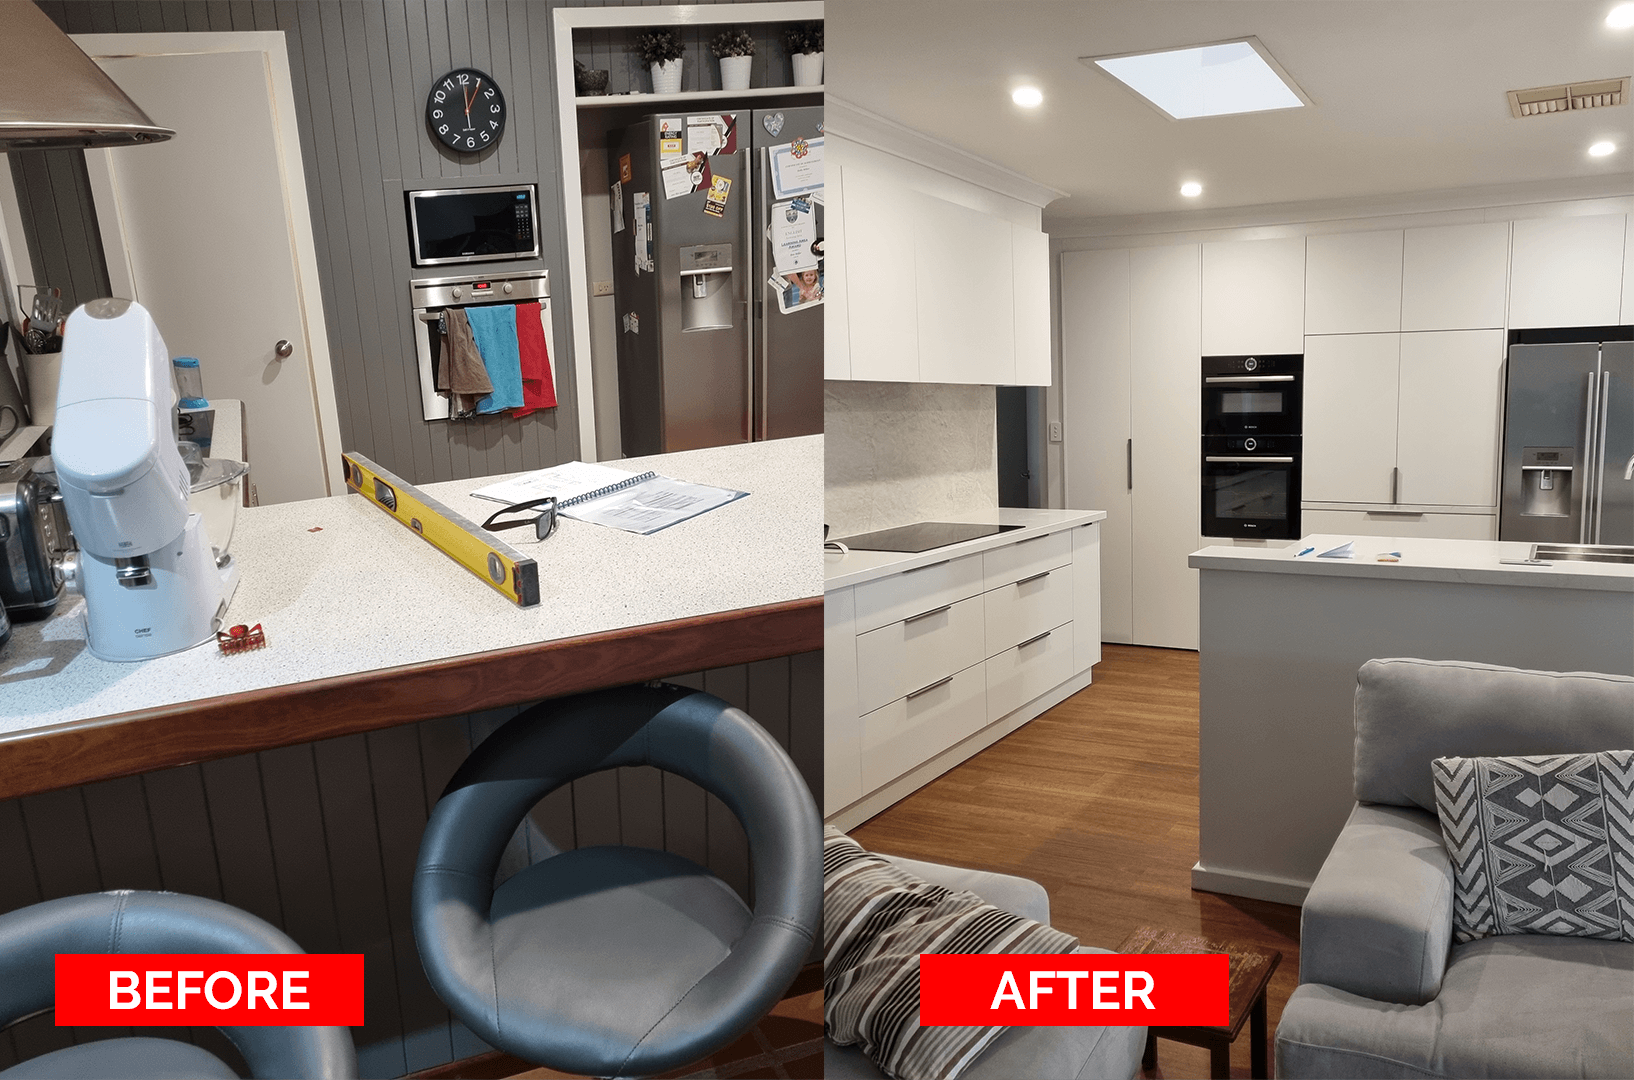 Before and After Kitchen Decor #1